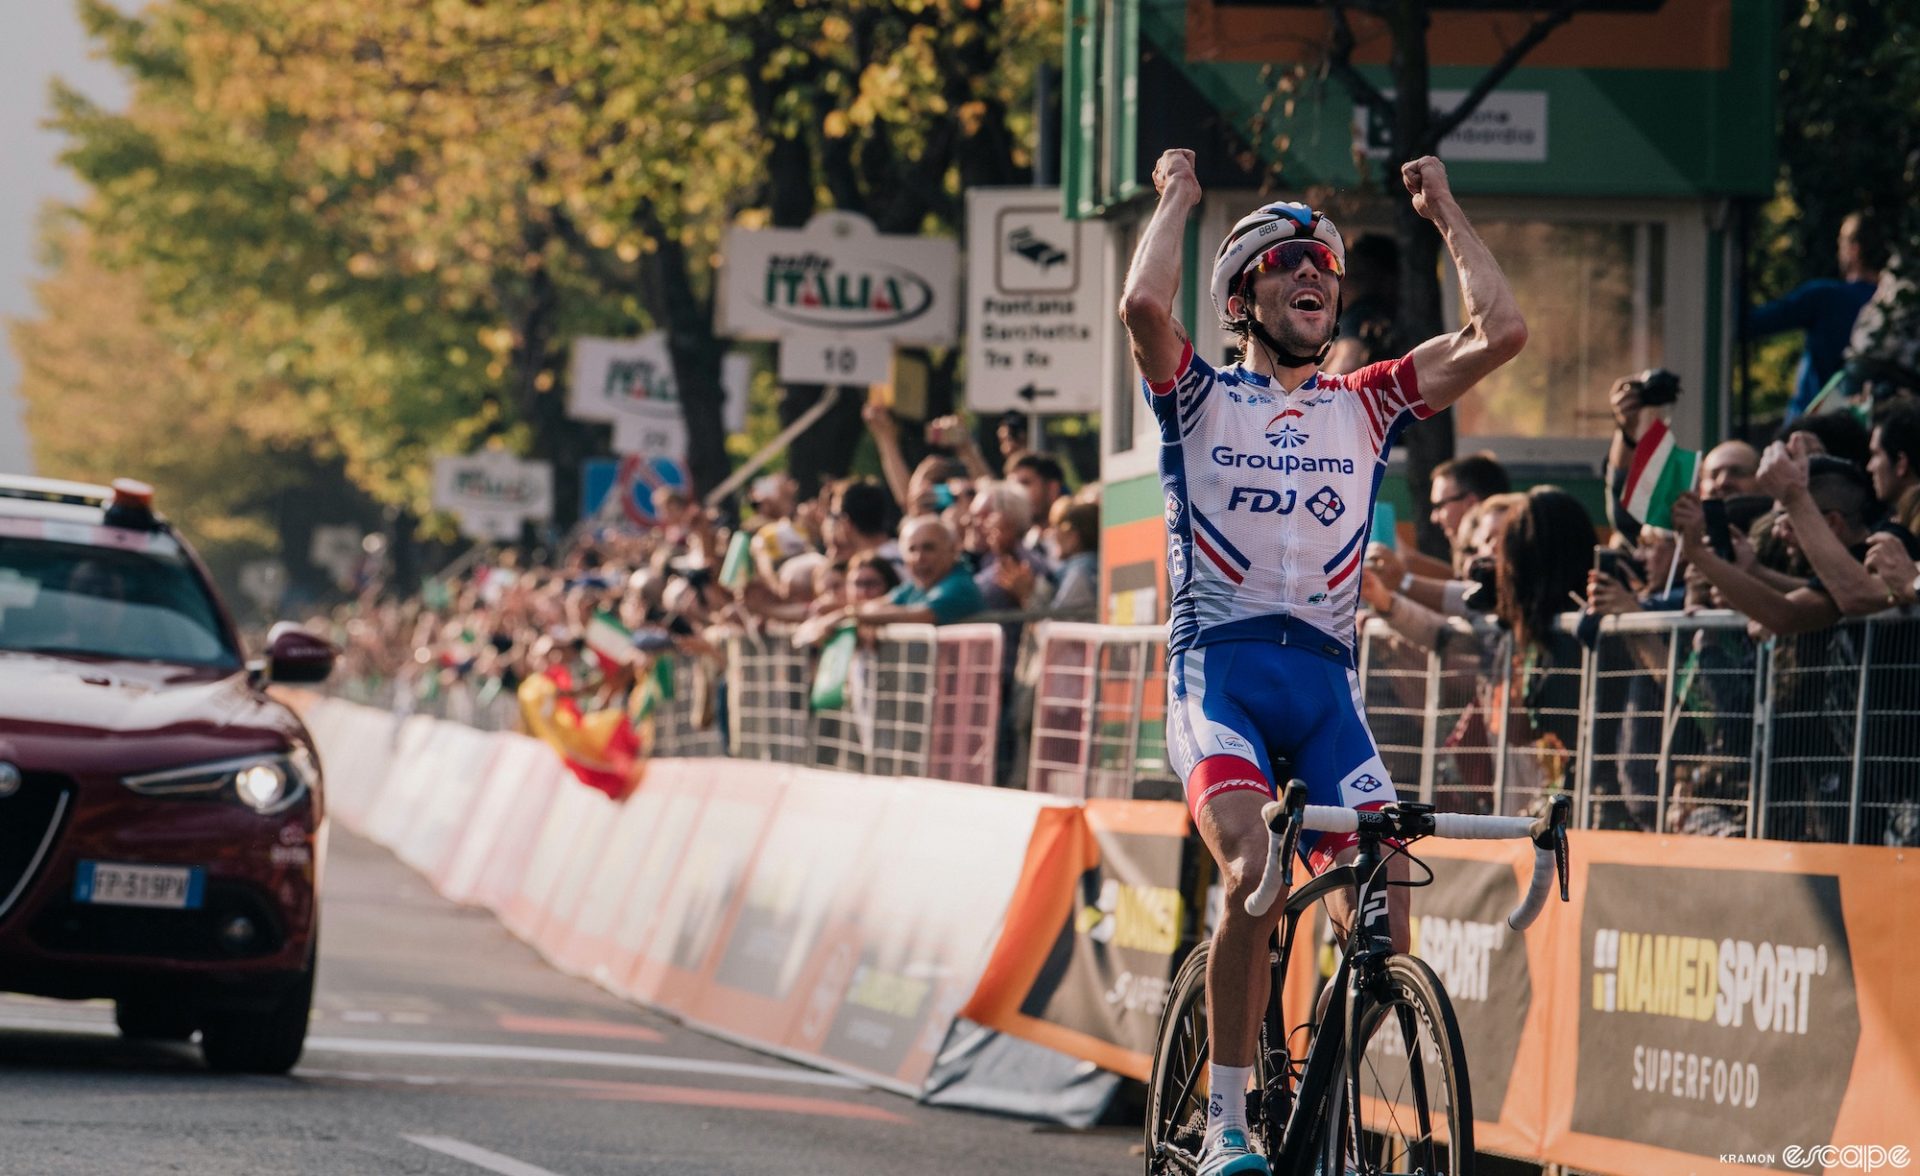 Thibaut Pinot wins Il Lombardia in 2018. The Frenchman is crossing the line alone, arms raised in a closed-fist salute. His head is tilted slightly back and there is an expression of joy on his face.